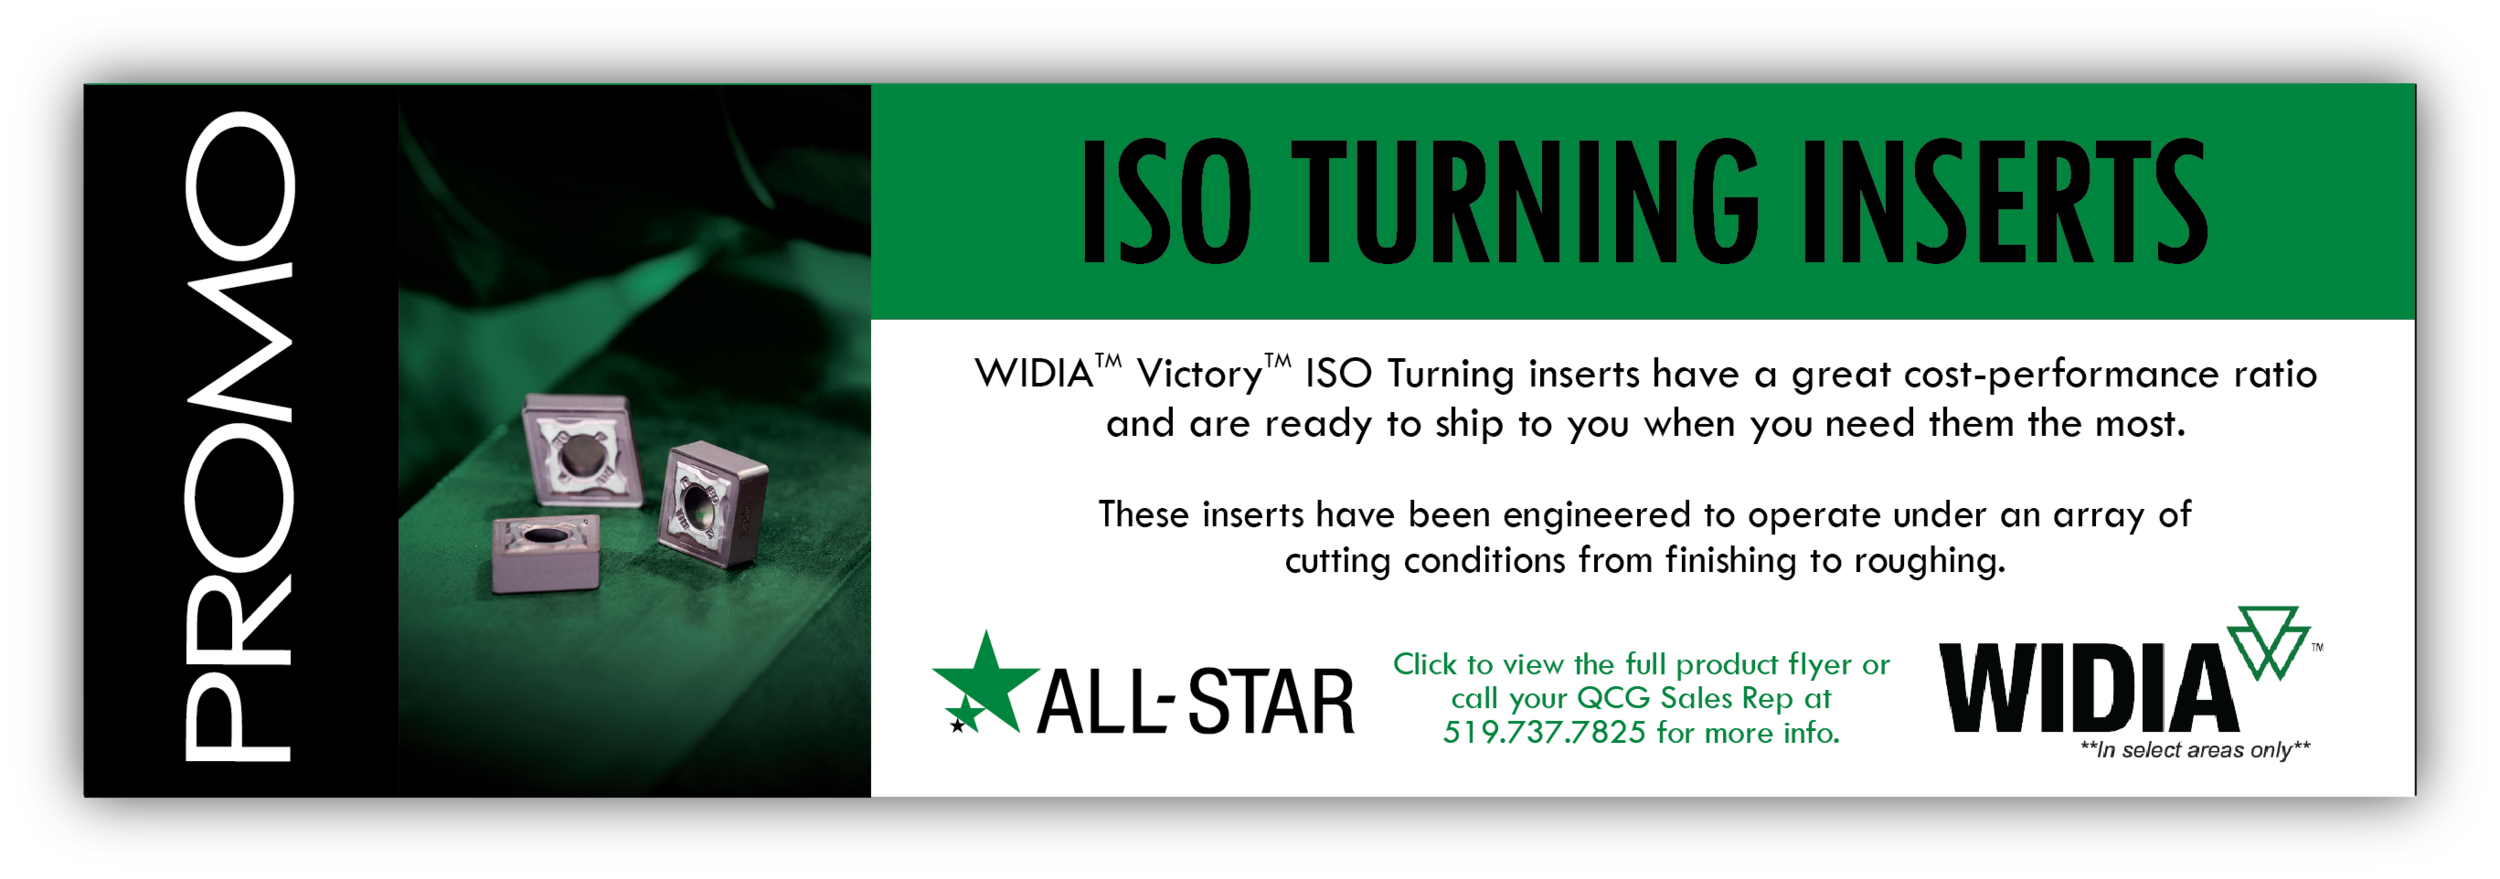 widia_iso turning inserts_jan2022.png